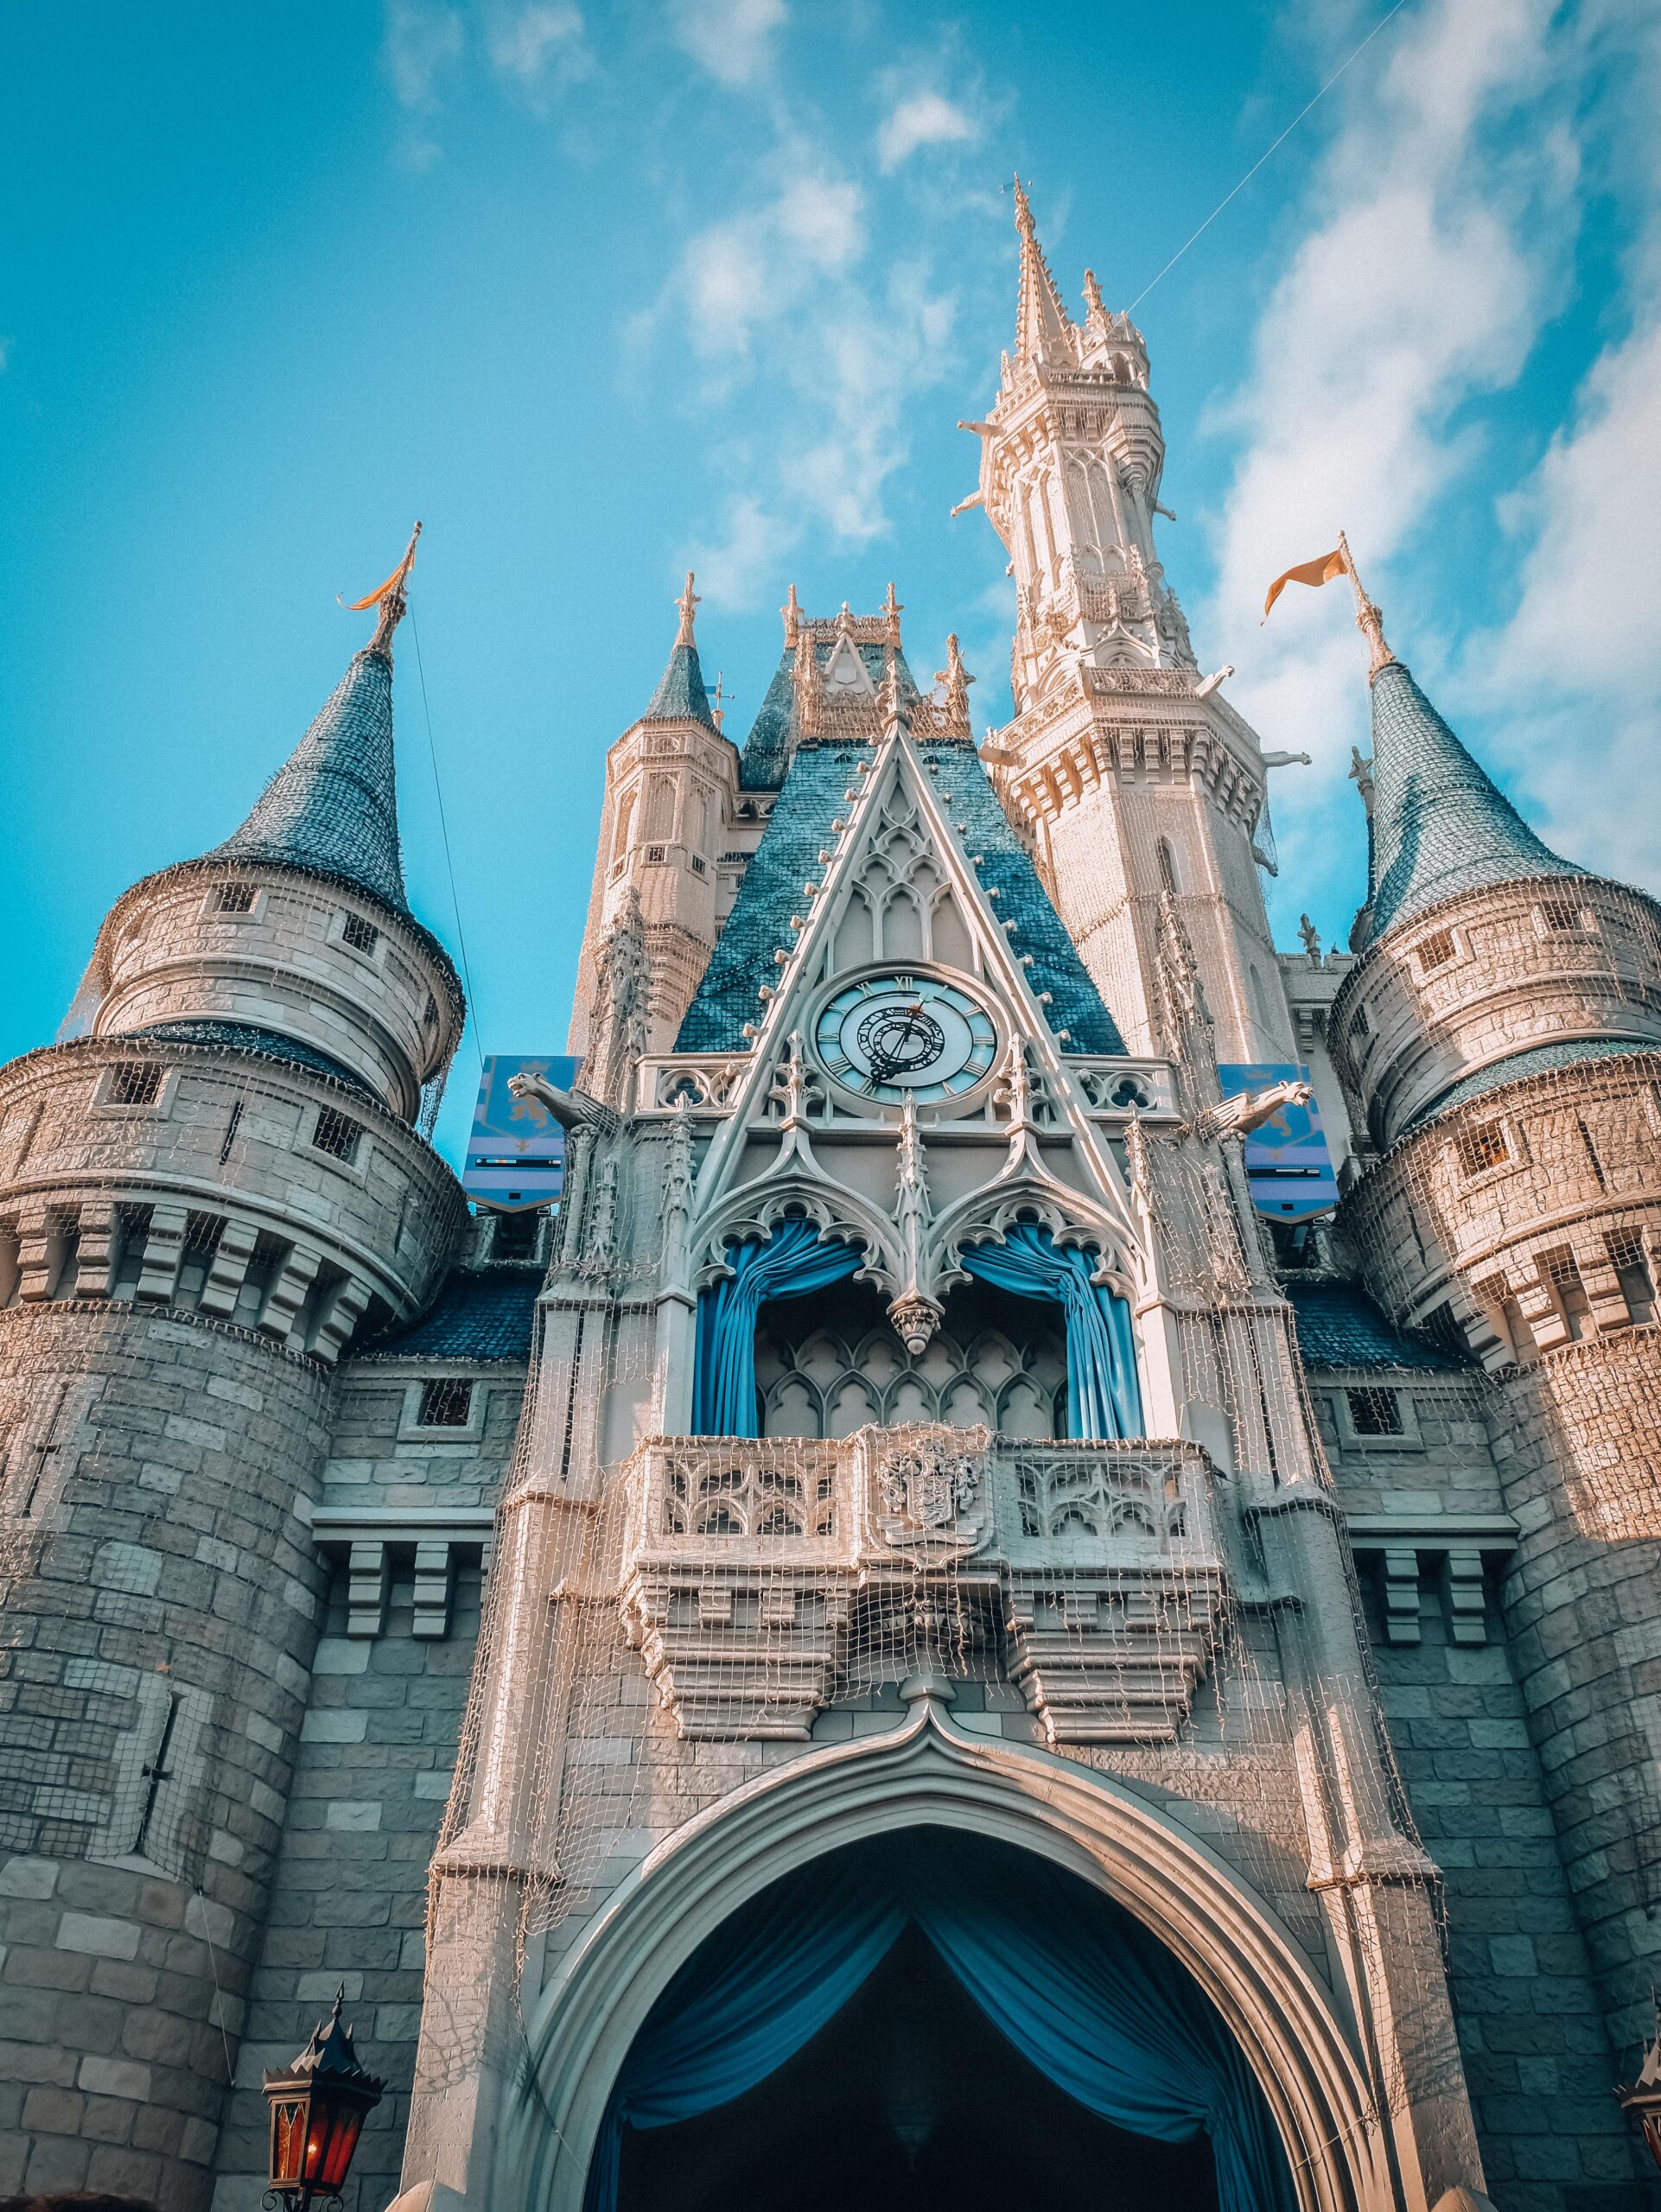 The Magic Kingdom Castle - some Disney Hotels offer a unique view of this. 